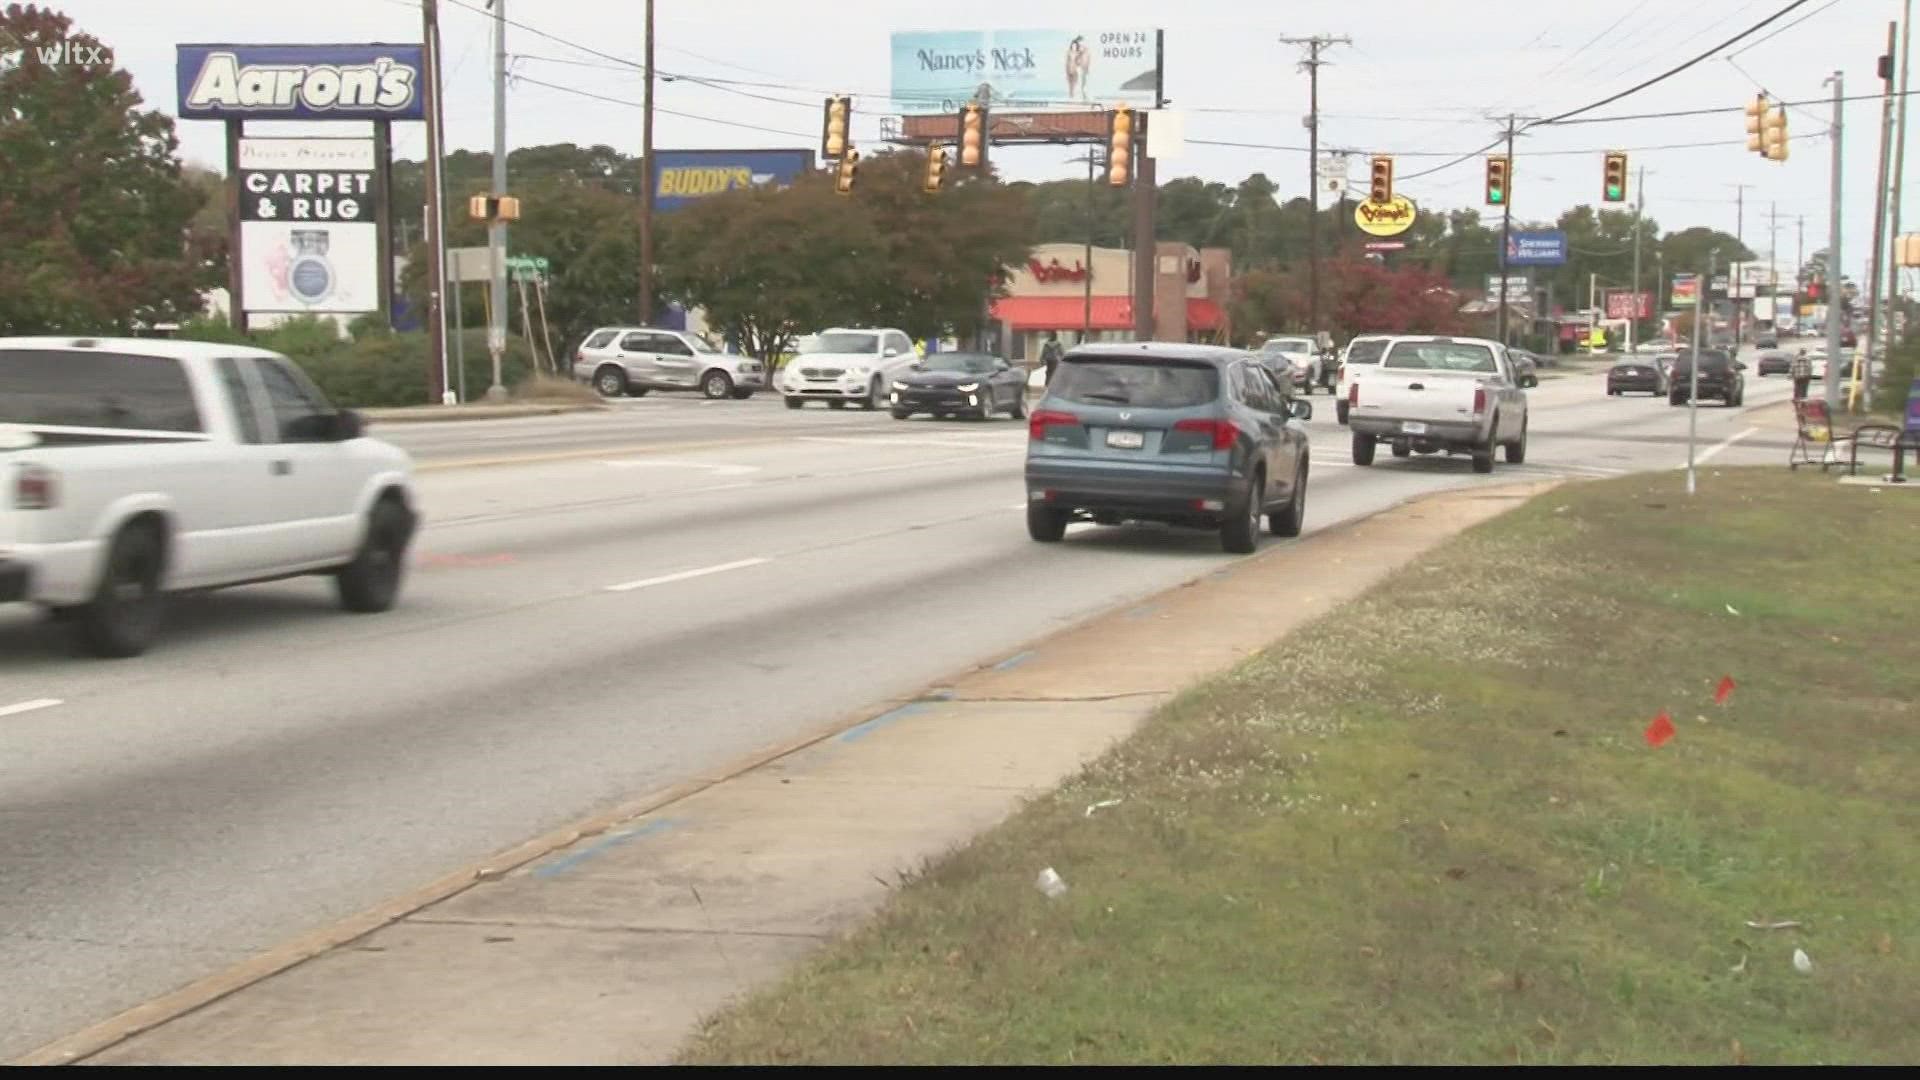 The accident happened early Wednesday morning, one person was hit by three vehicles while crossing Broad River road.